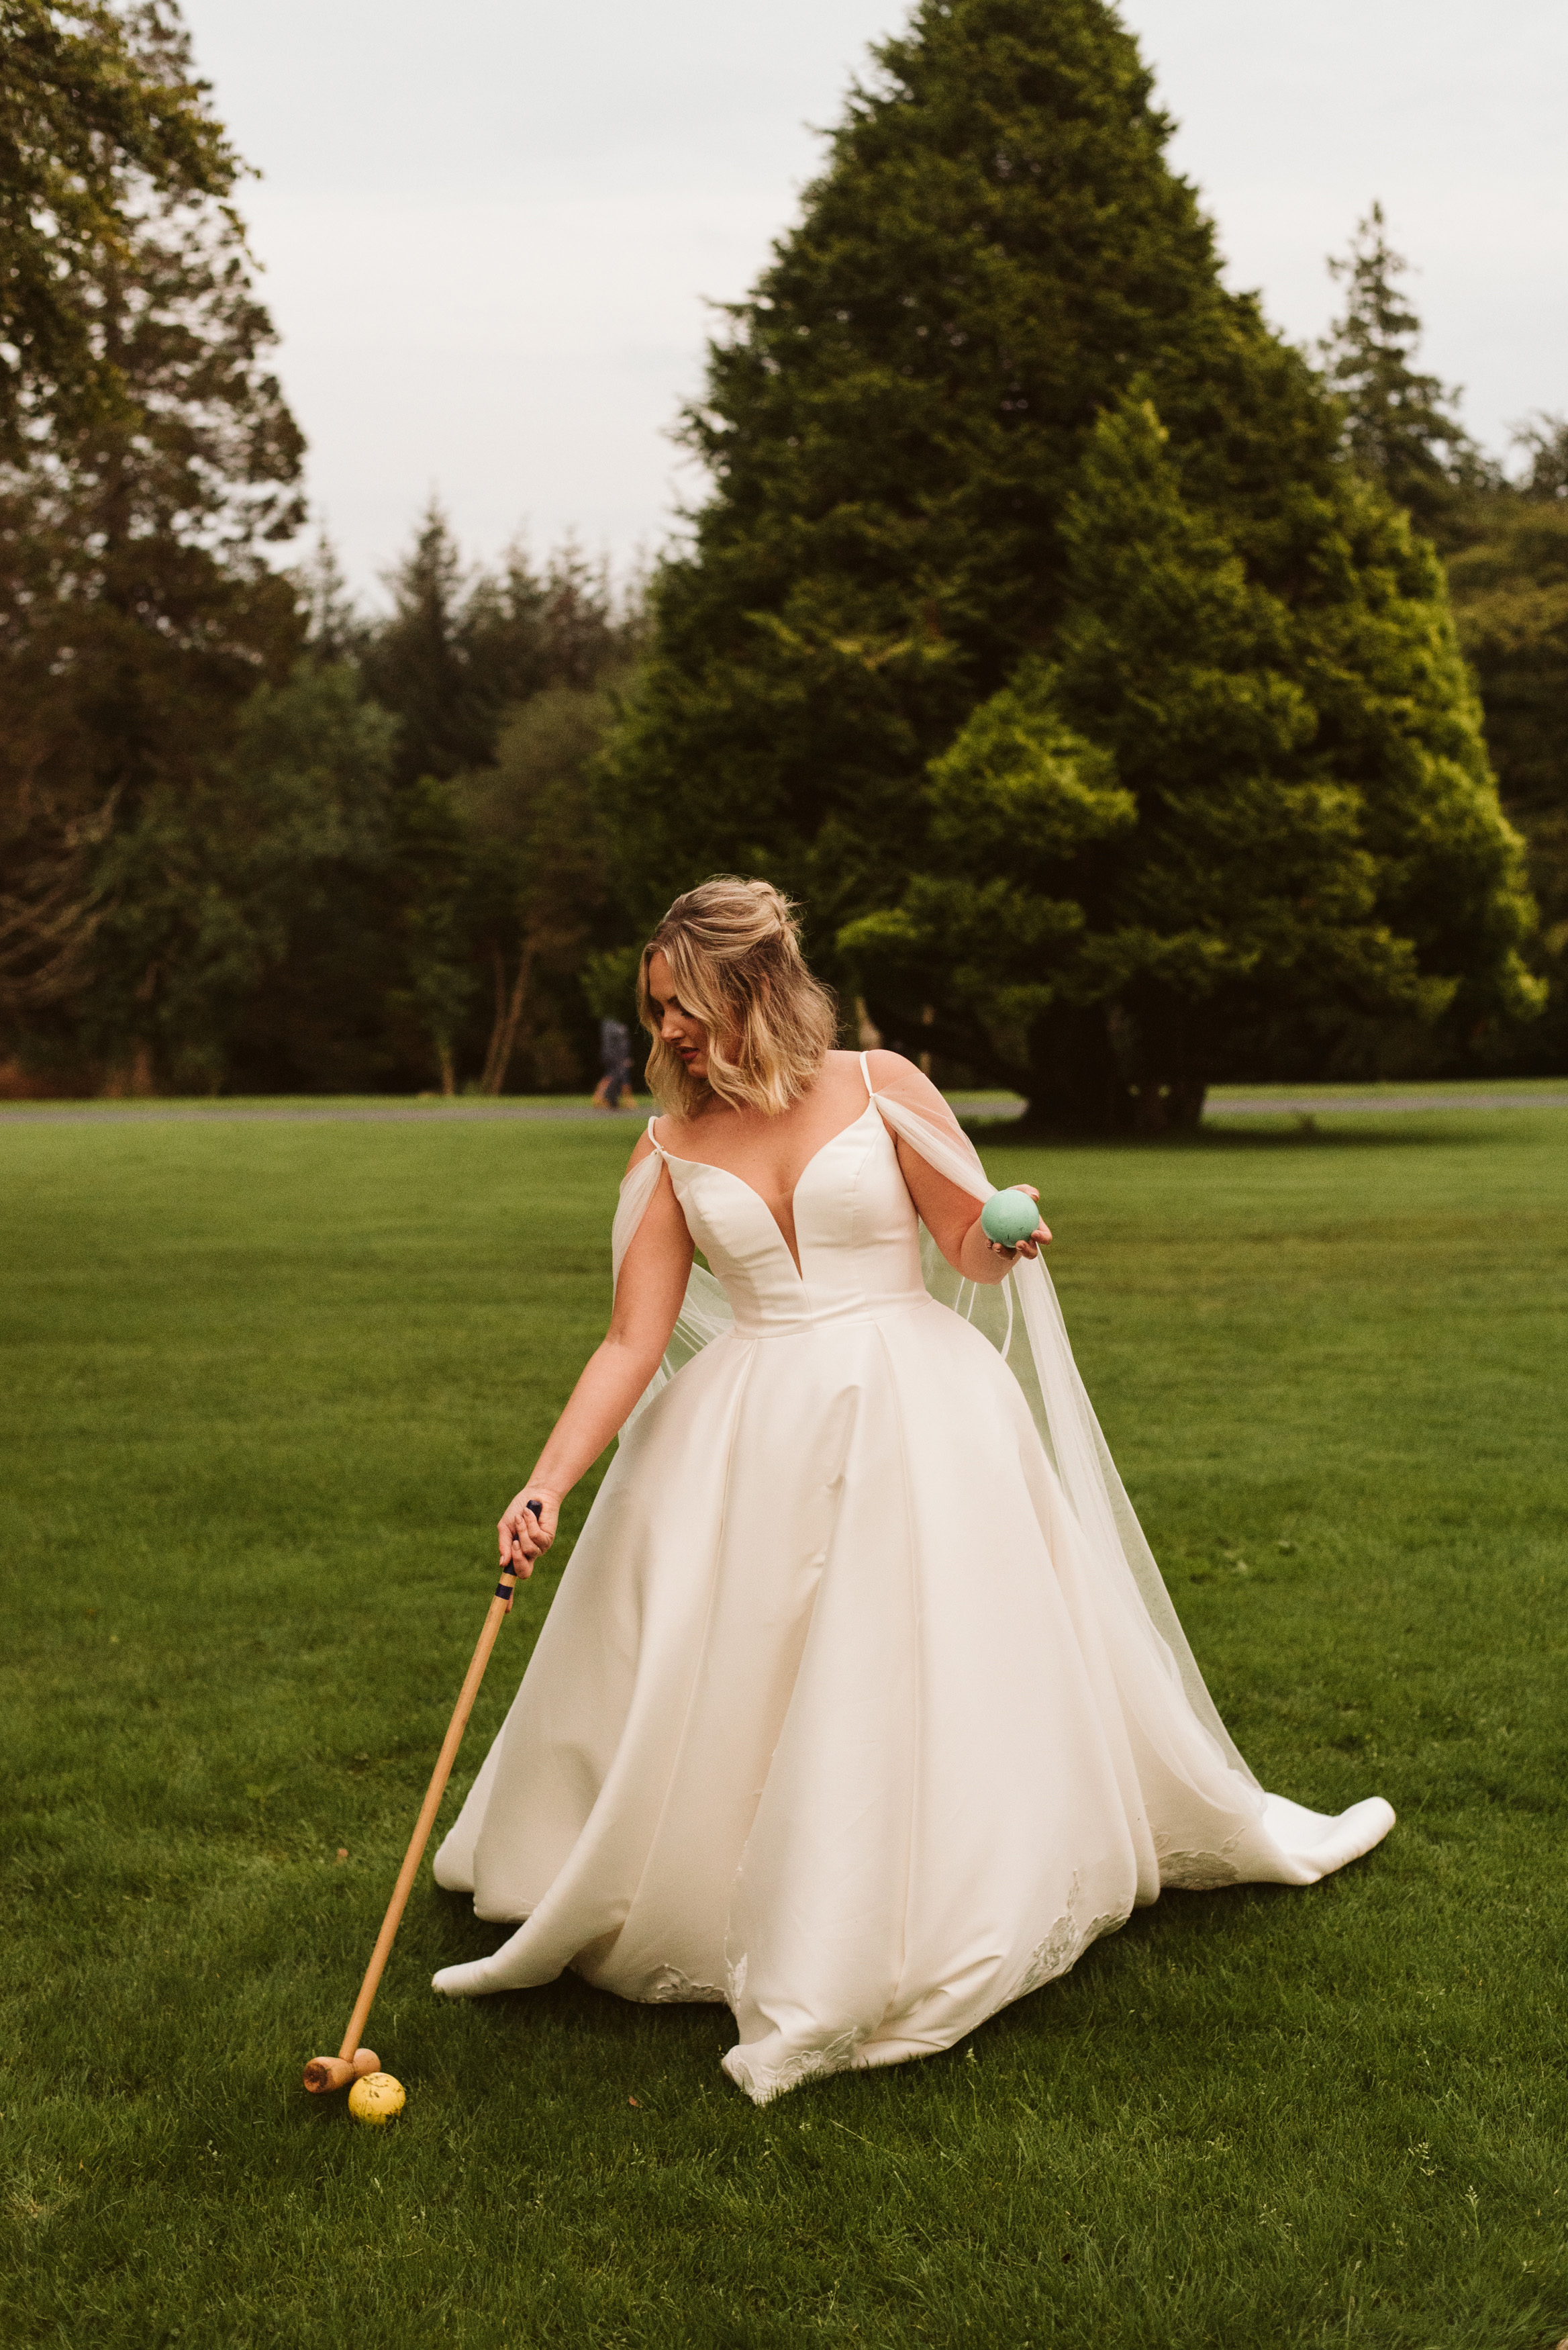 Bride playing croquet in a mikado ballgown wedding dress with straps and a tulle cape on the grounds of Lough Eske Castle in Ireland